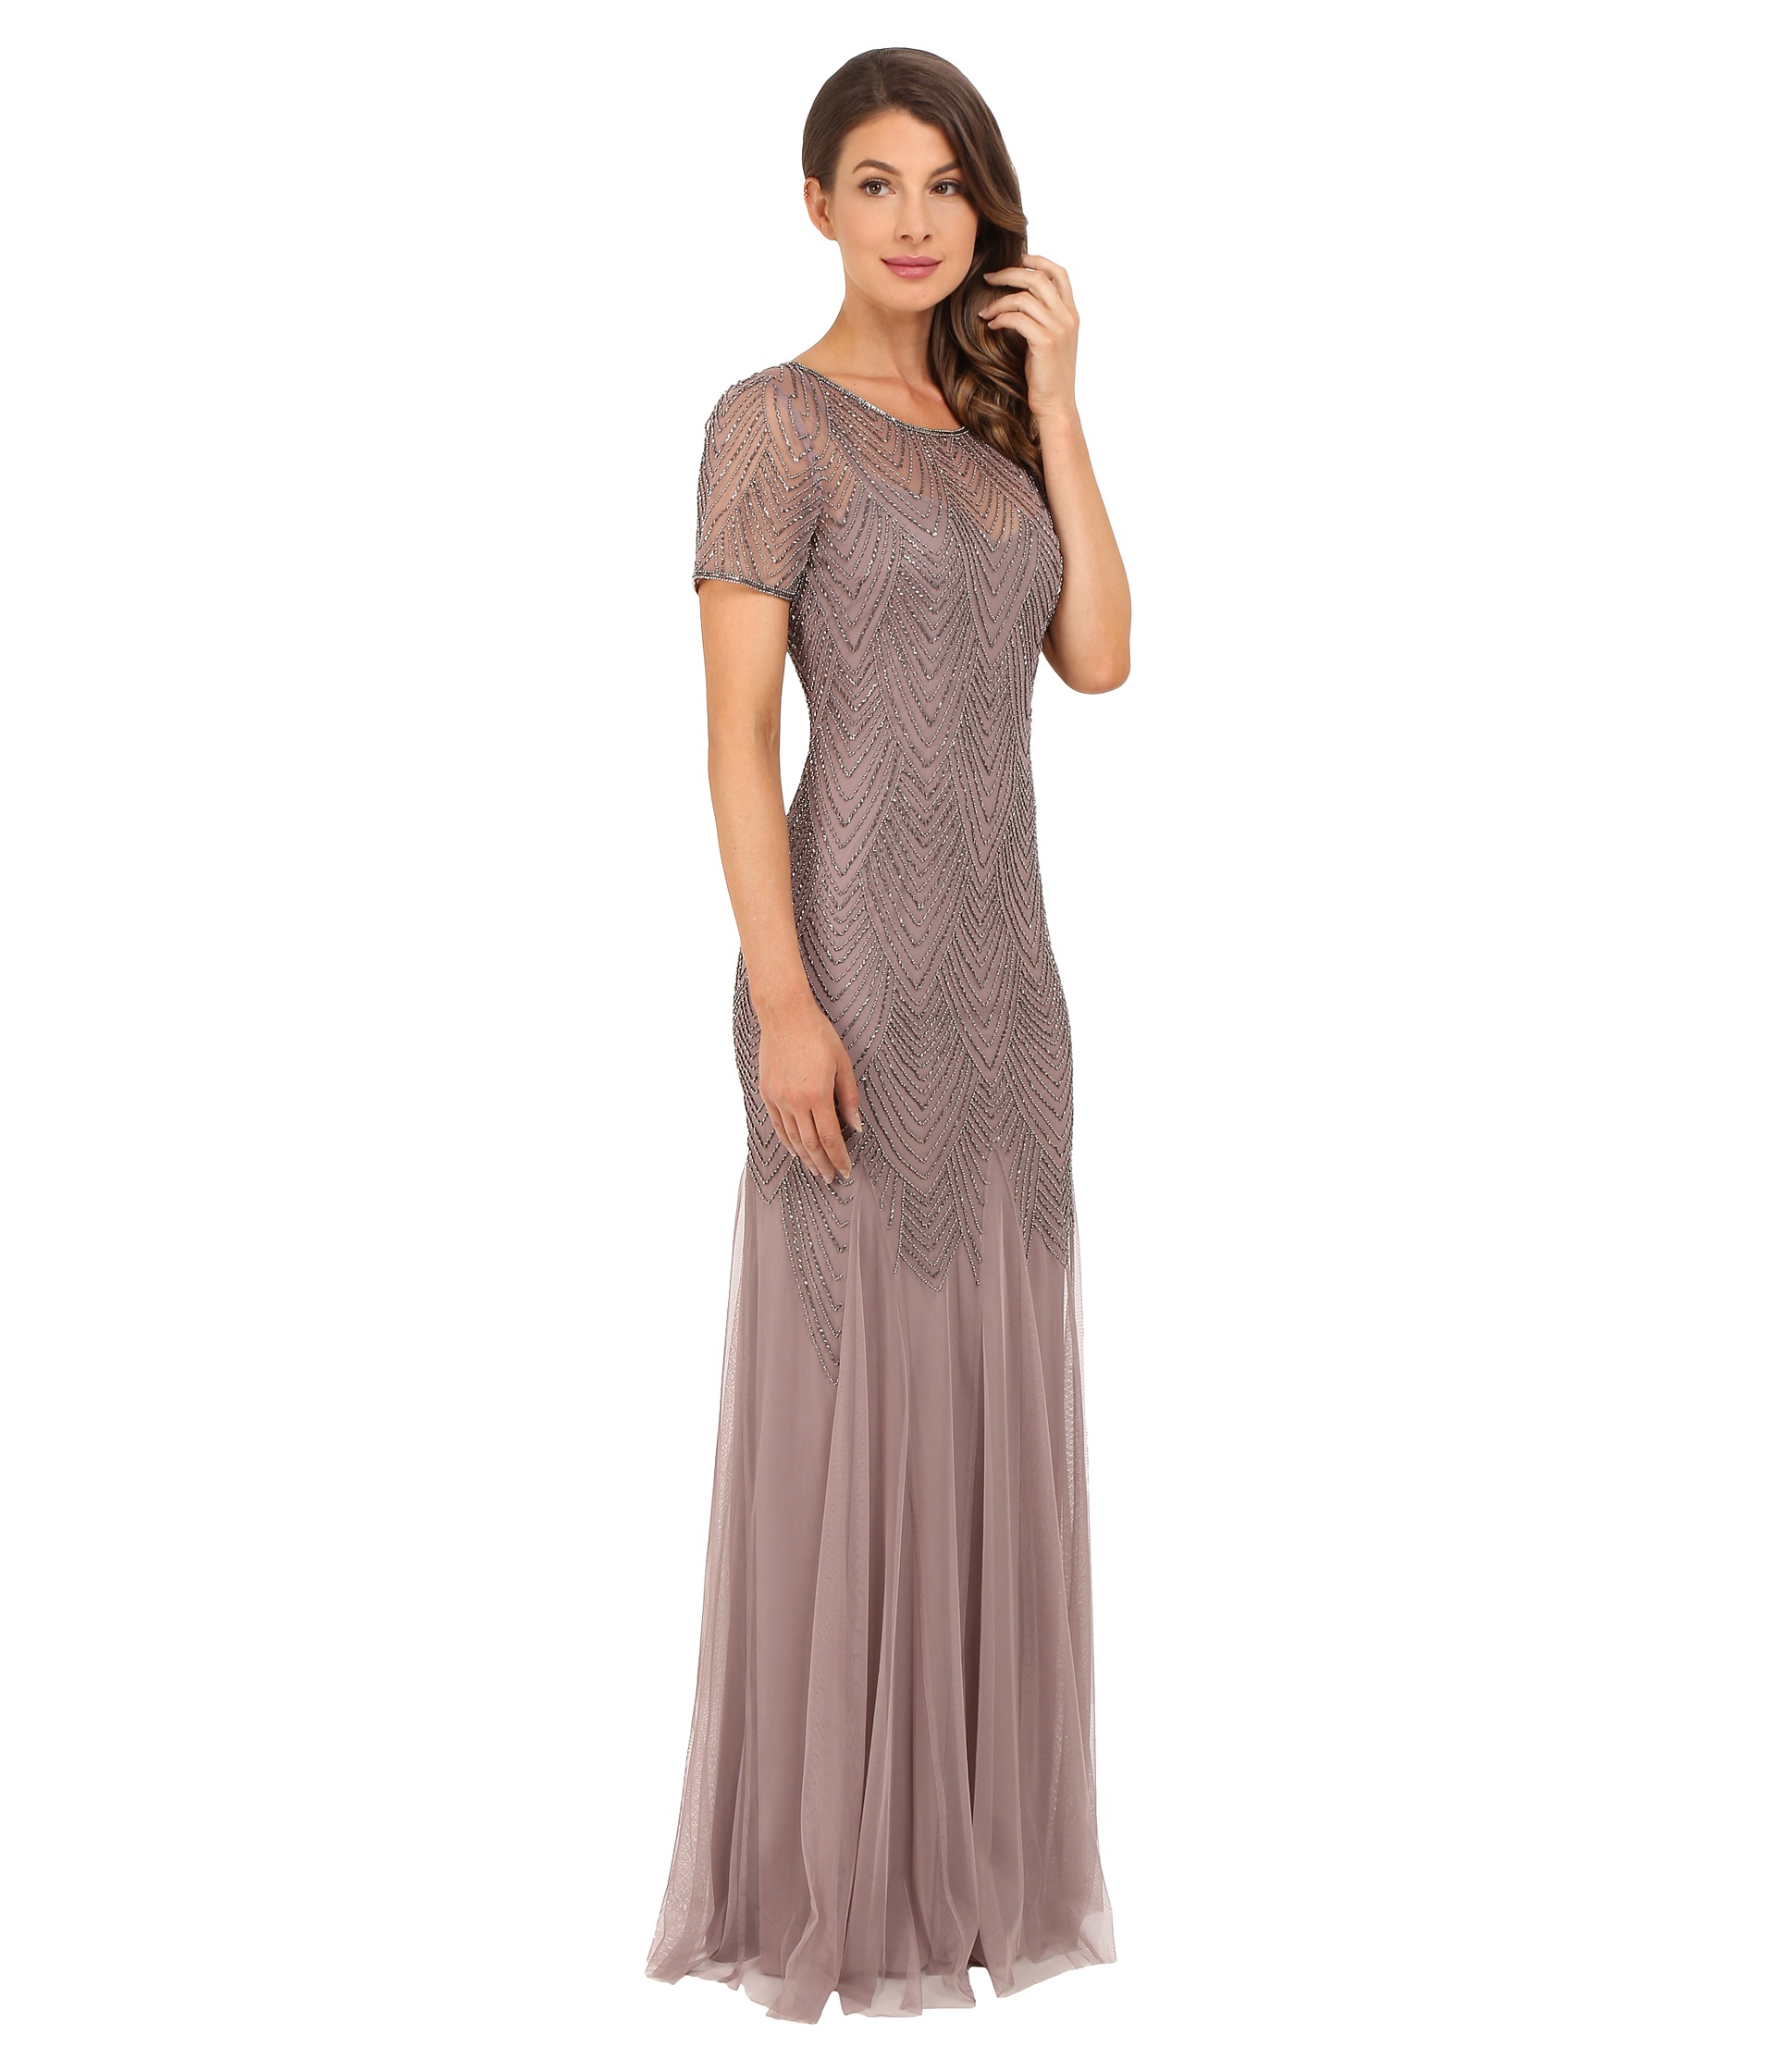 Adrianna Papell Short Sleeve Beaded Gown Stone